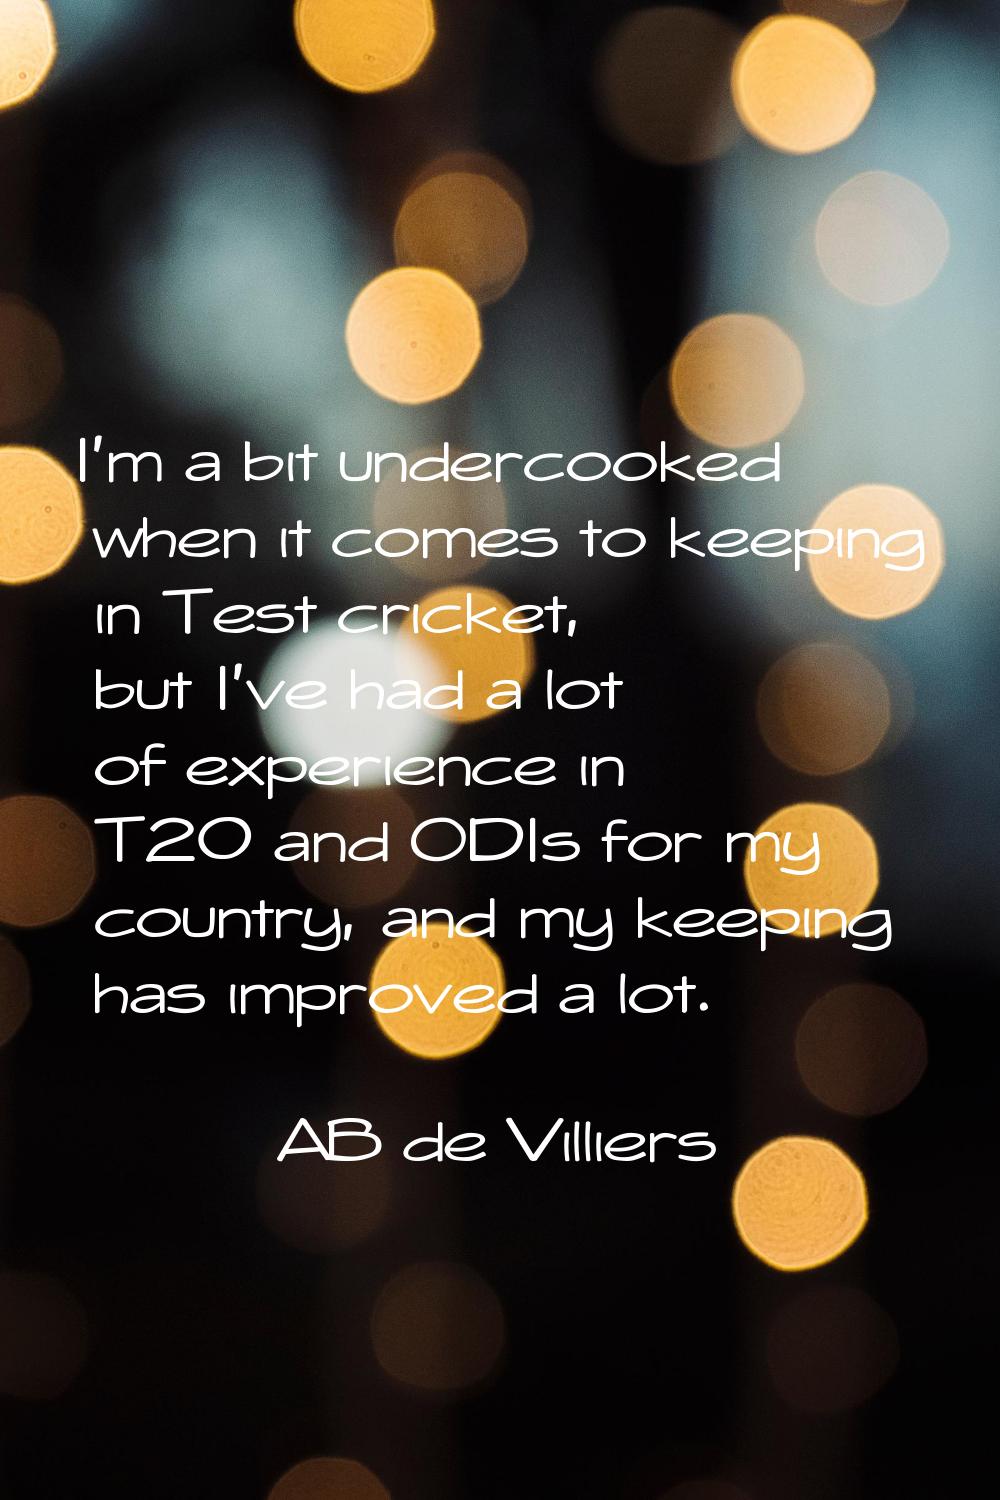 I'm a bit undercooked when it comes to keeping in Test cricket, but I've had a lot of experience in